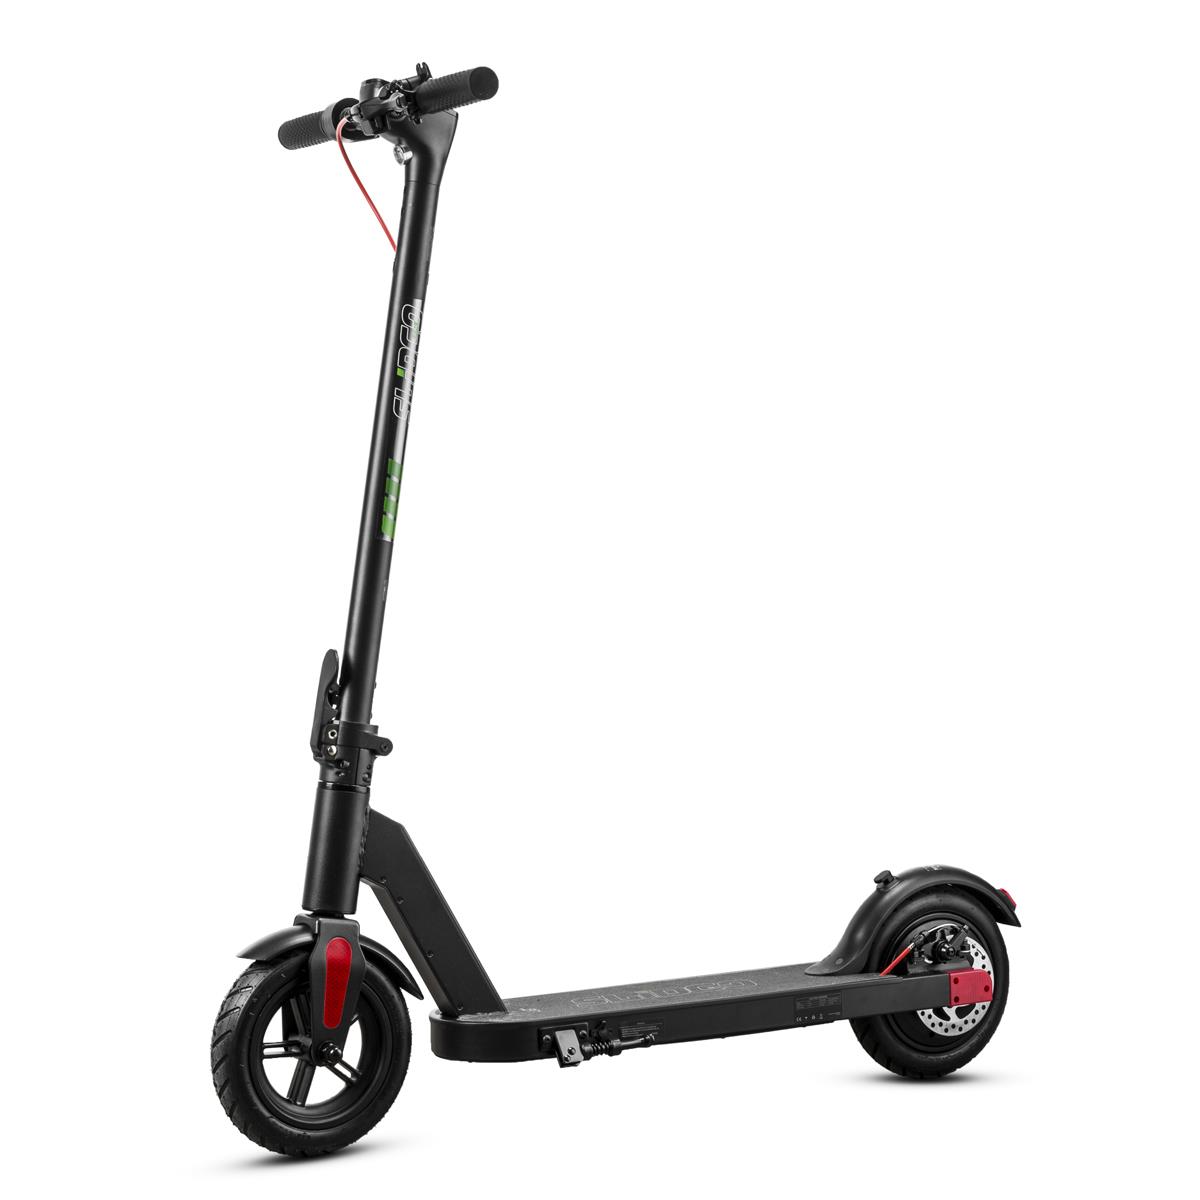 Slidgo X6 8.5" Electric Scooter $230 + free s/h at Adorama